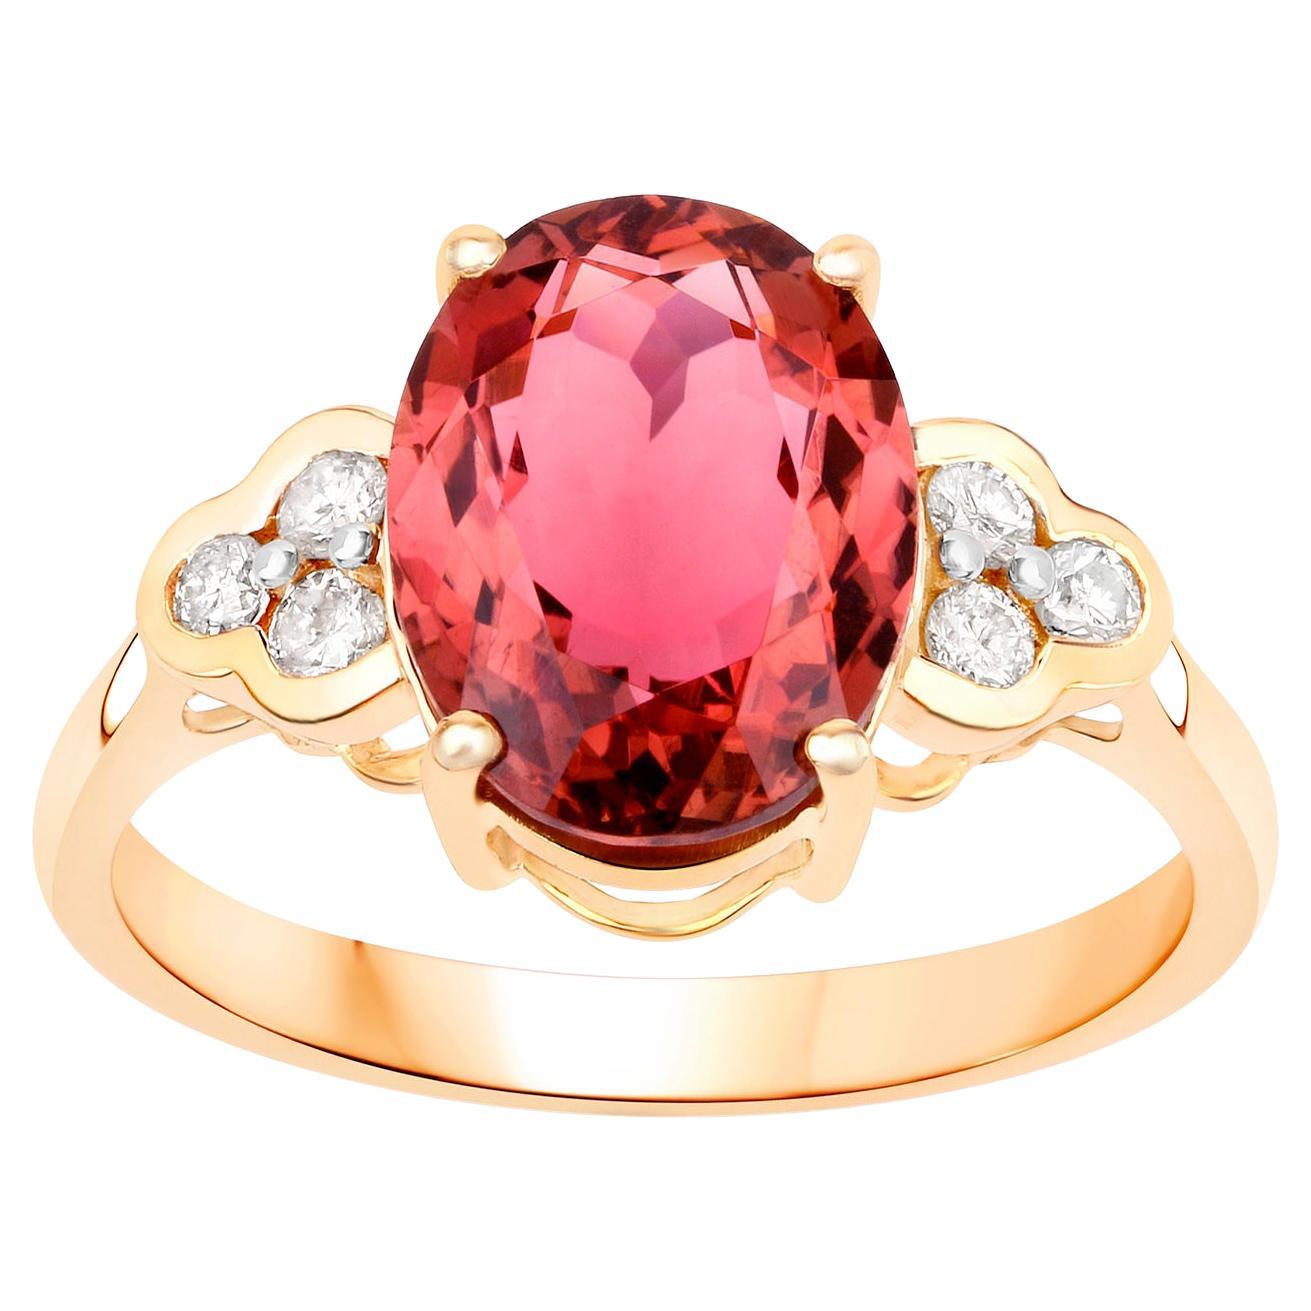 Raspberry Pink Tourmaline Cocktail Ring With Diamonds Total 3.30 Carats 14K Gold